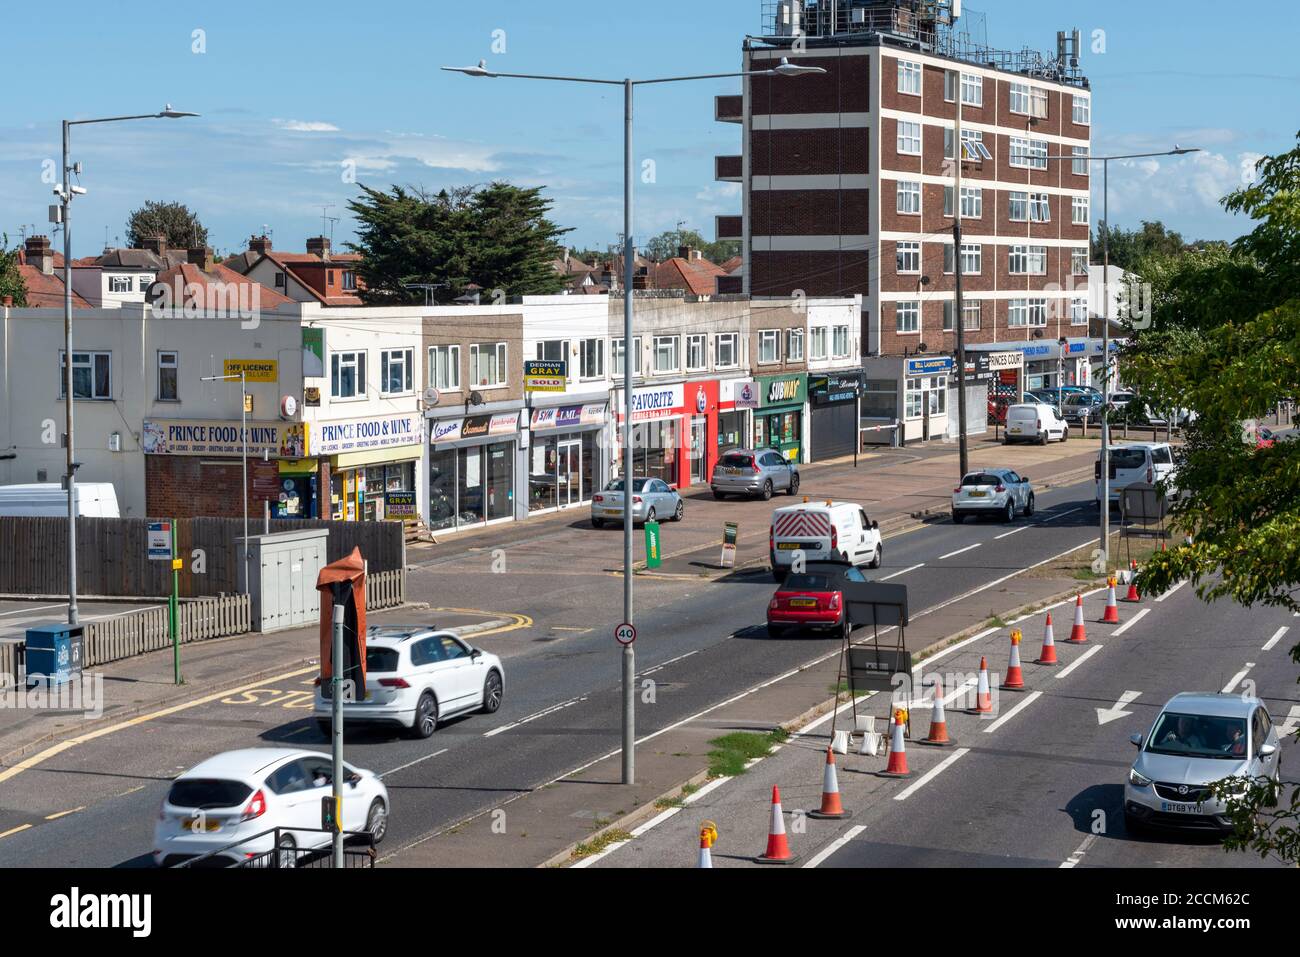 The Bell road junction of the A127 Prince Avenue with Hobleythick Lane, soon to be the site of a lengthy redesign and roadworks. Shops and flats Stock Photo